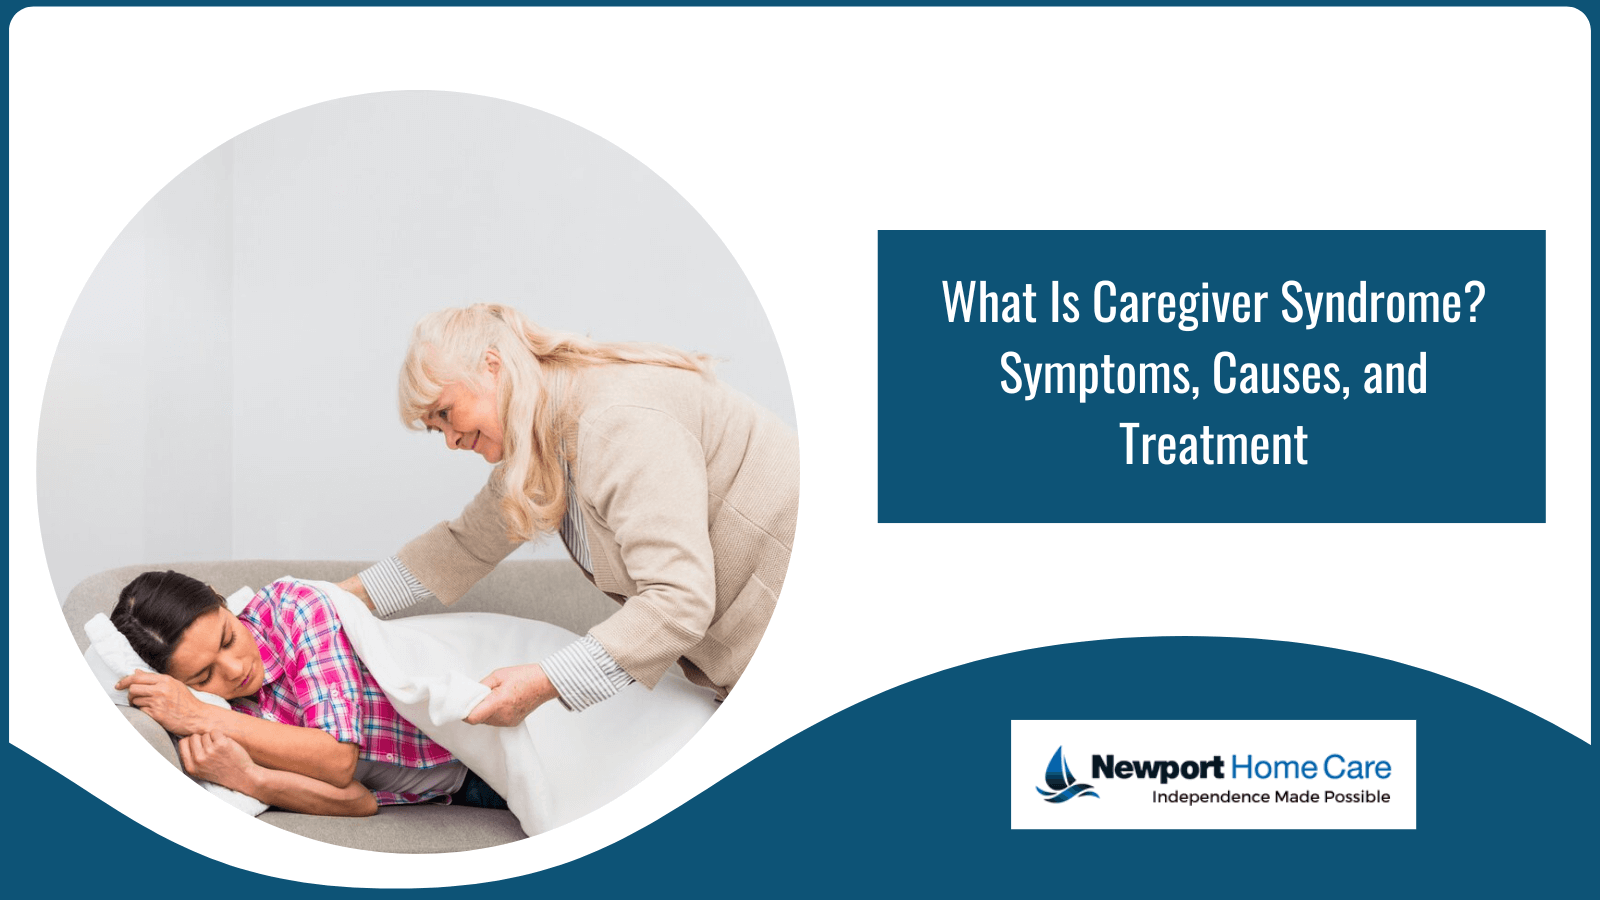 What Is Caregiver Syndrome? Symptoms, Causes, and Treatment